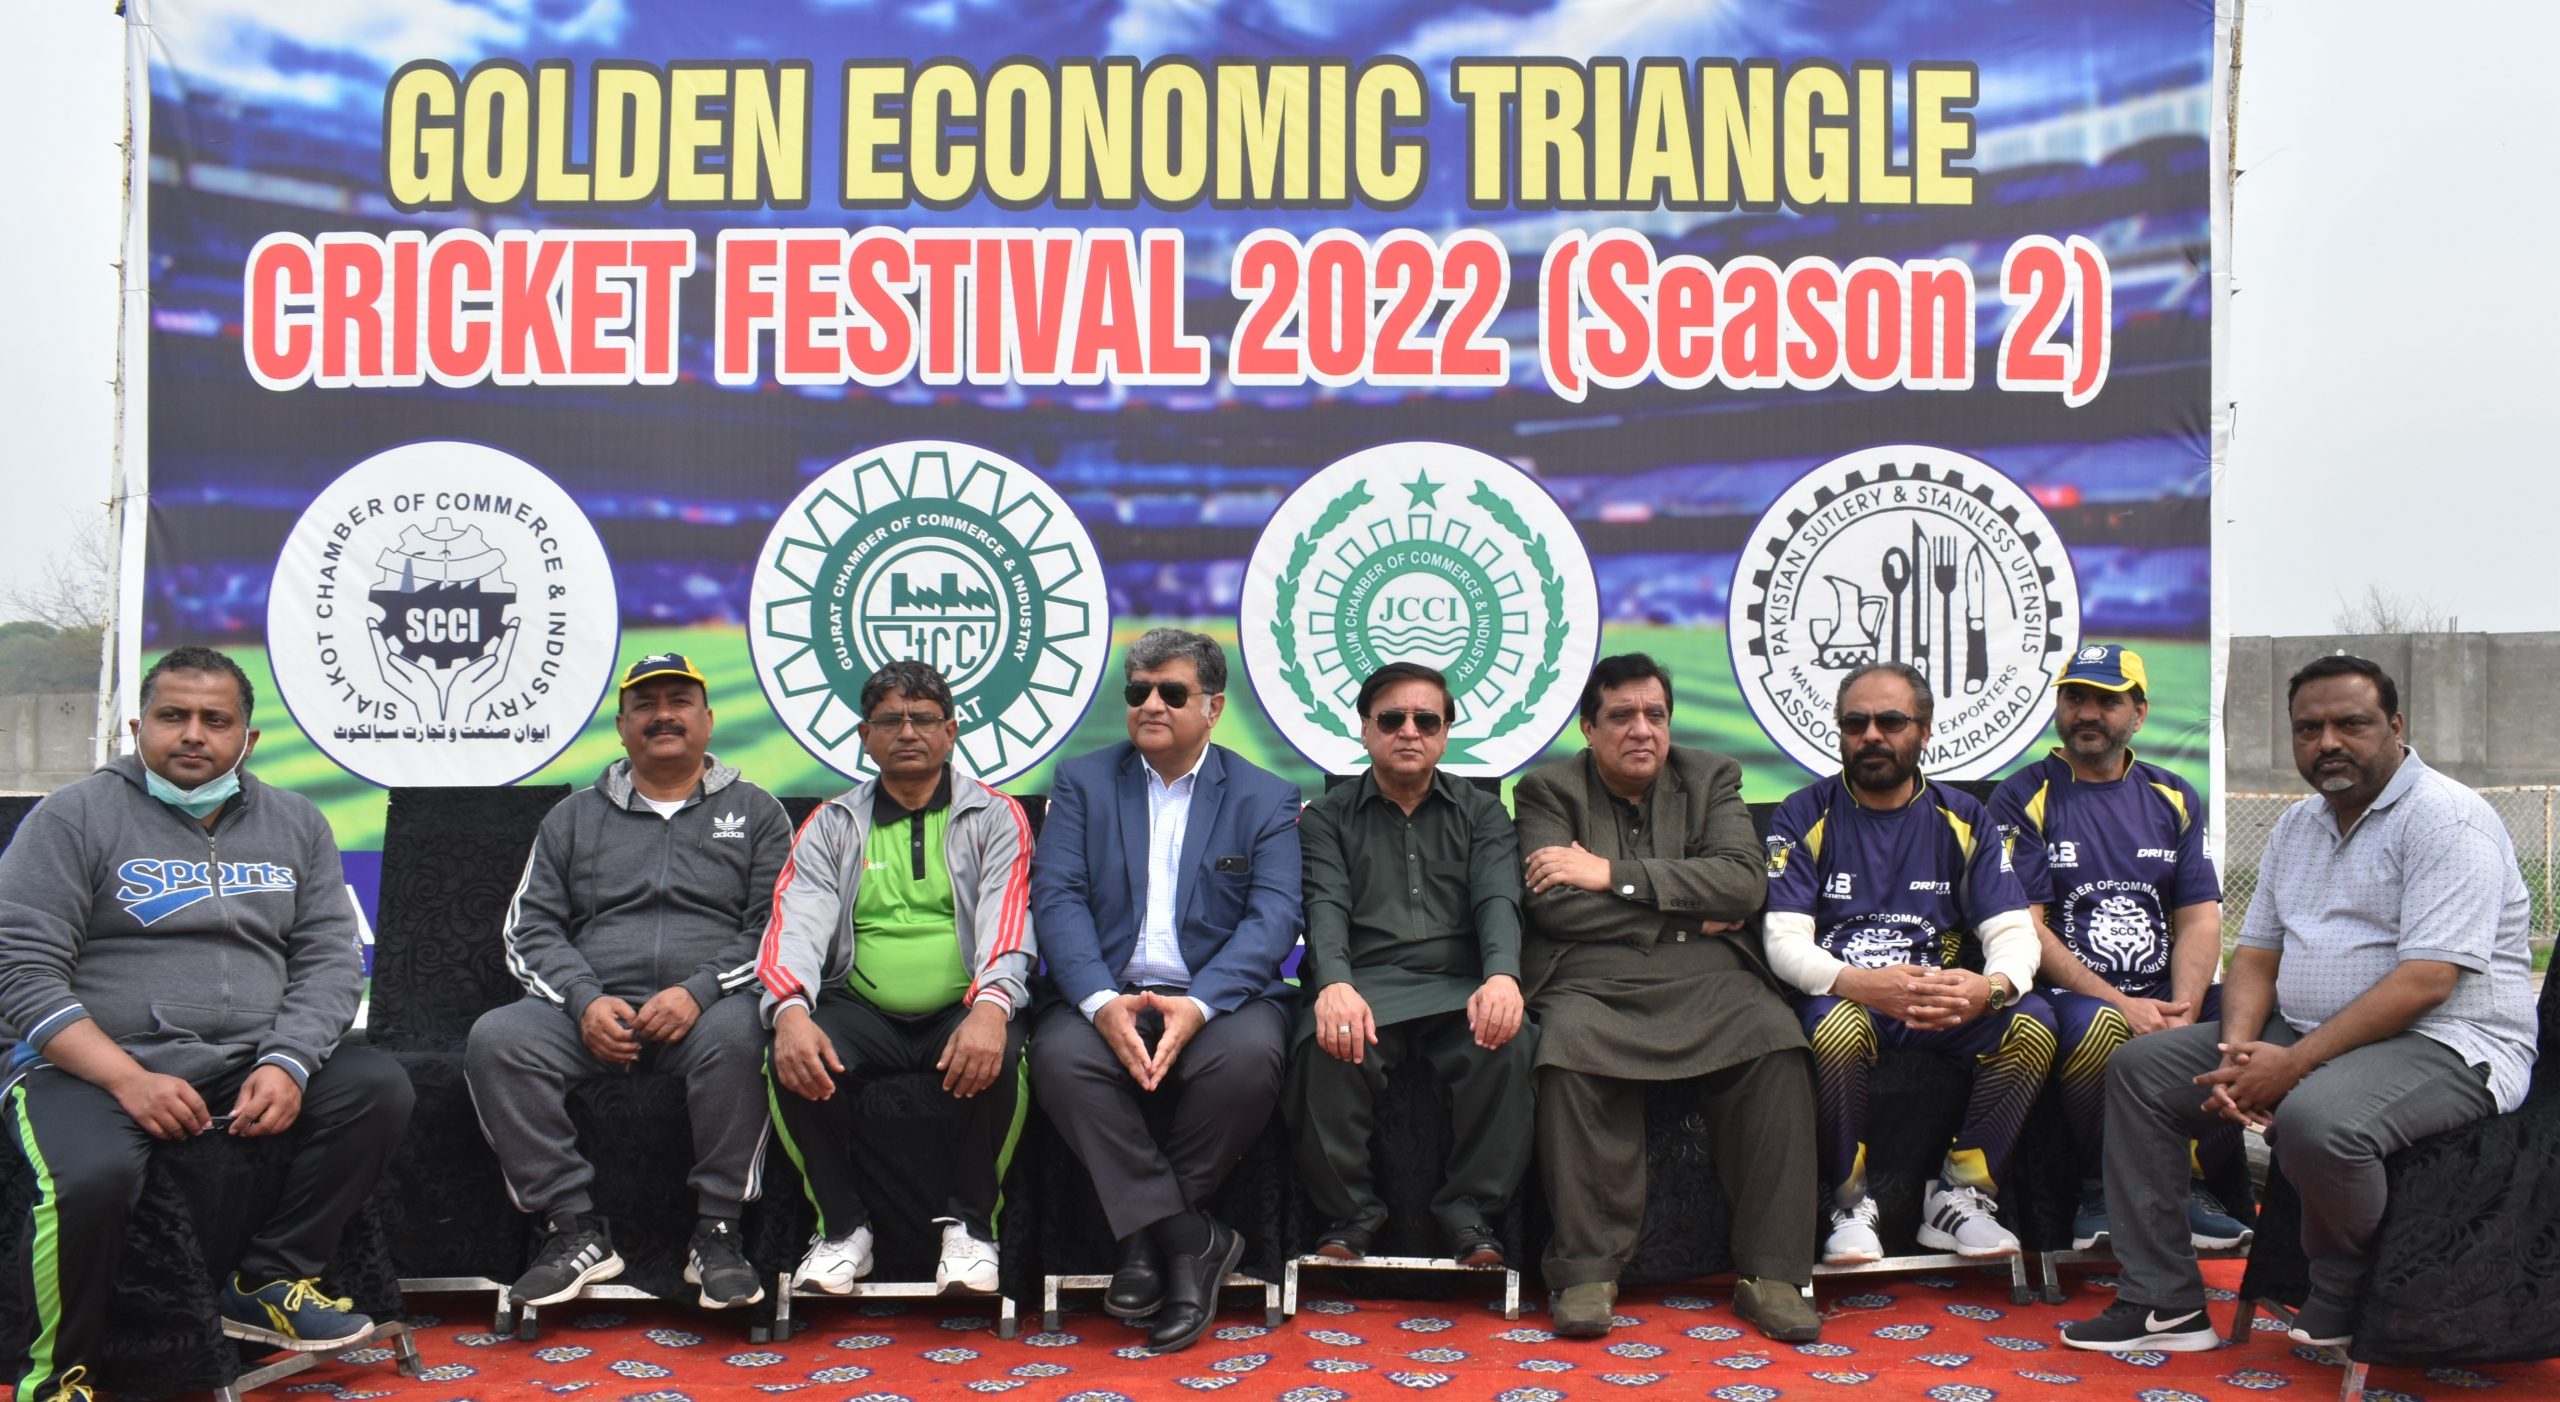 Sialkot Chamber of Commerce & Industry hosted second “Golden Economic Triangle Cricket Festival 2022” held between the Teams of Sialkot, Gujrat, Jhelum Chamber of Commerce & Industry and Wazirabad Cutlery Association.  President Sialkot Chamber Mian Imran Akbar honored the event as Chief Guest. Mr. Naeem Imtiaz Gondal, President Gujrat Chamber, Mr. Umar Mushtaq Bargatt, President Jhelum Chamber and Mr. Muhammad Khalid Mughal, Chairman Wazirabad Cutlery Association also participated in the Tournament.